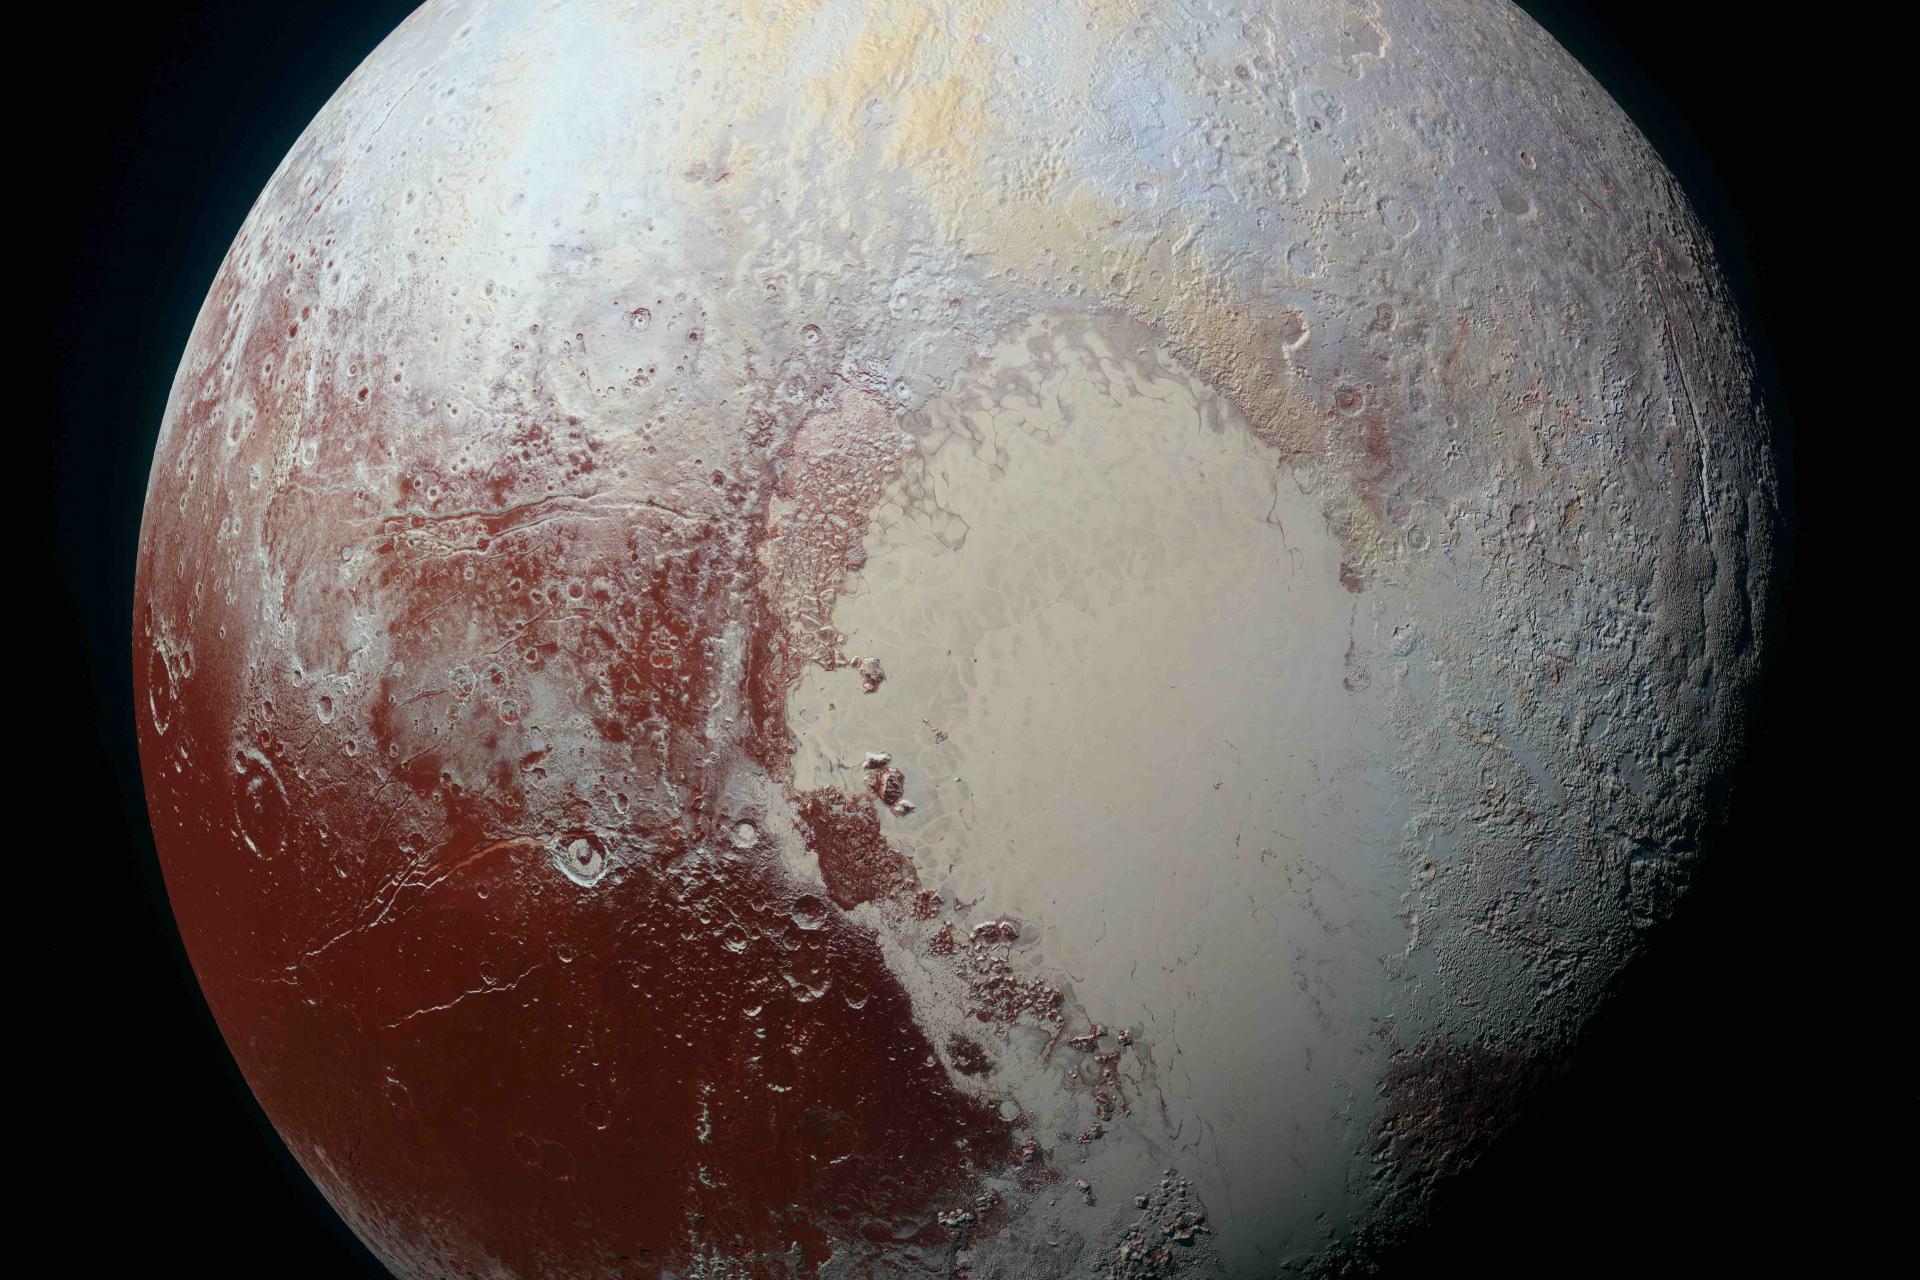 Pluto illuminated by the sun, viewed from just outside its orbit.